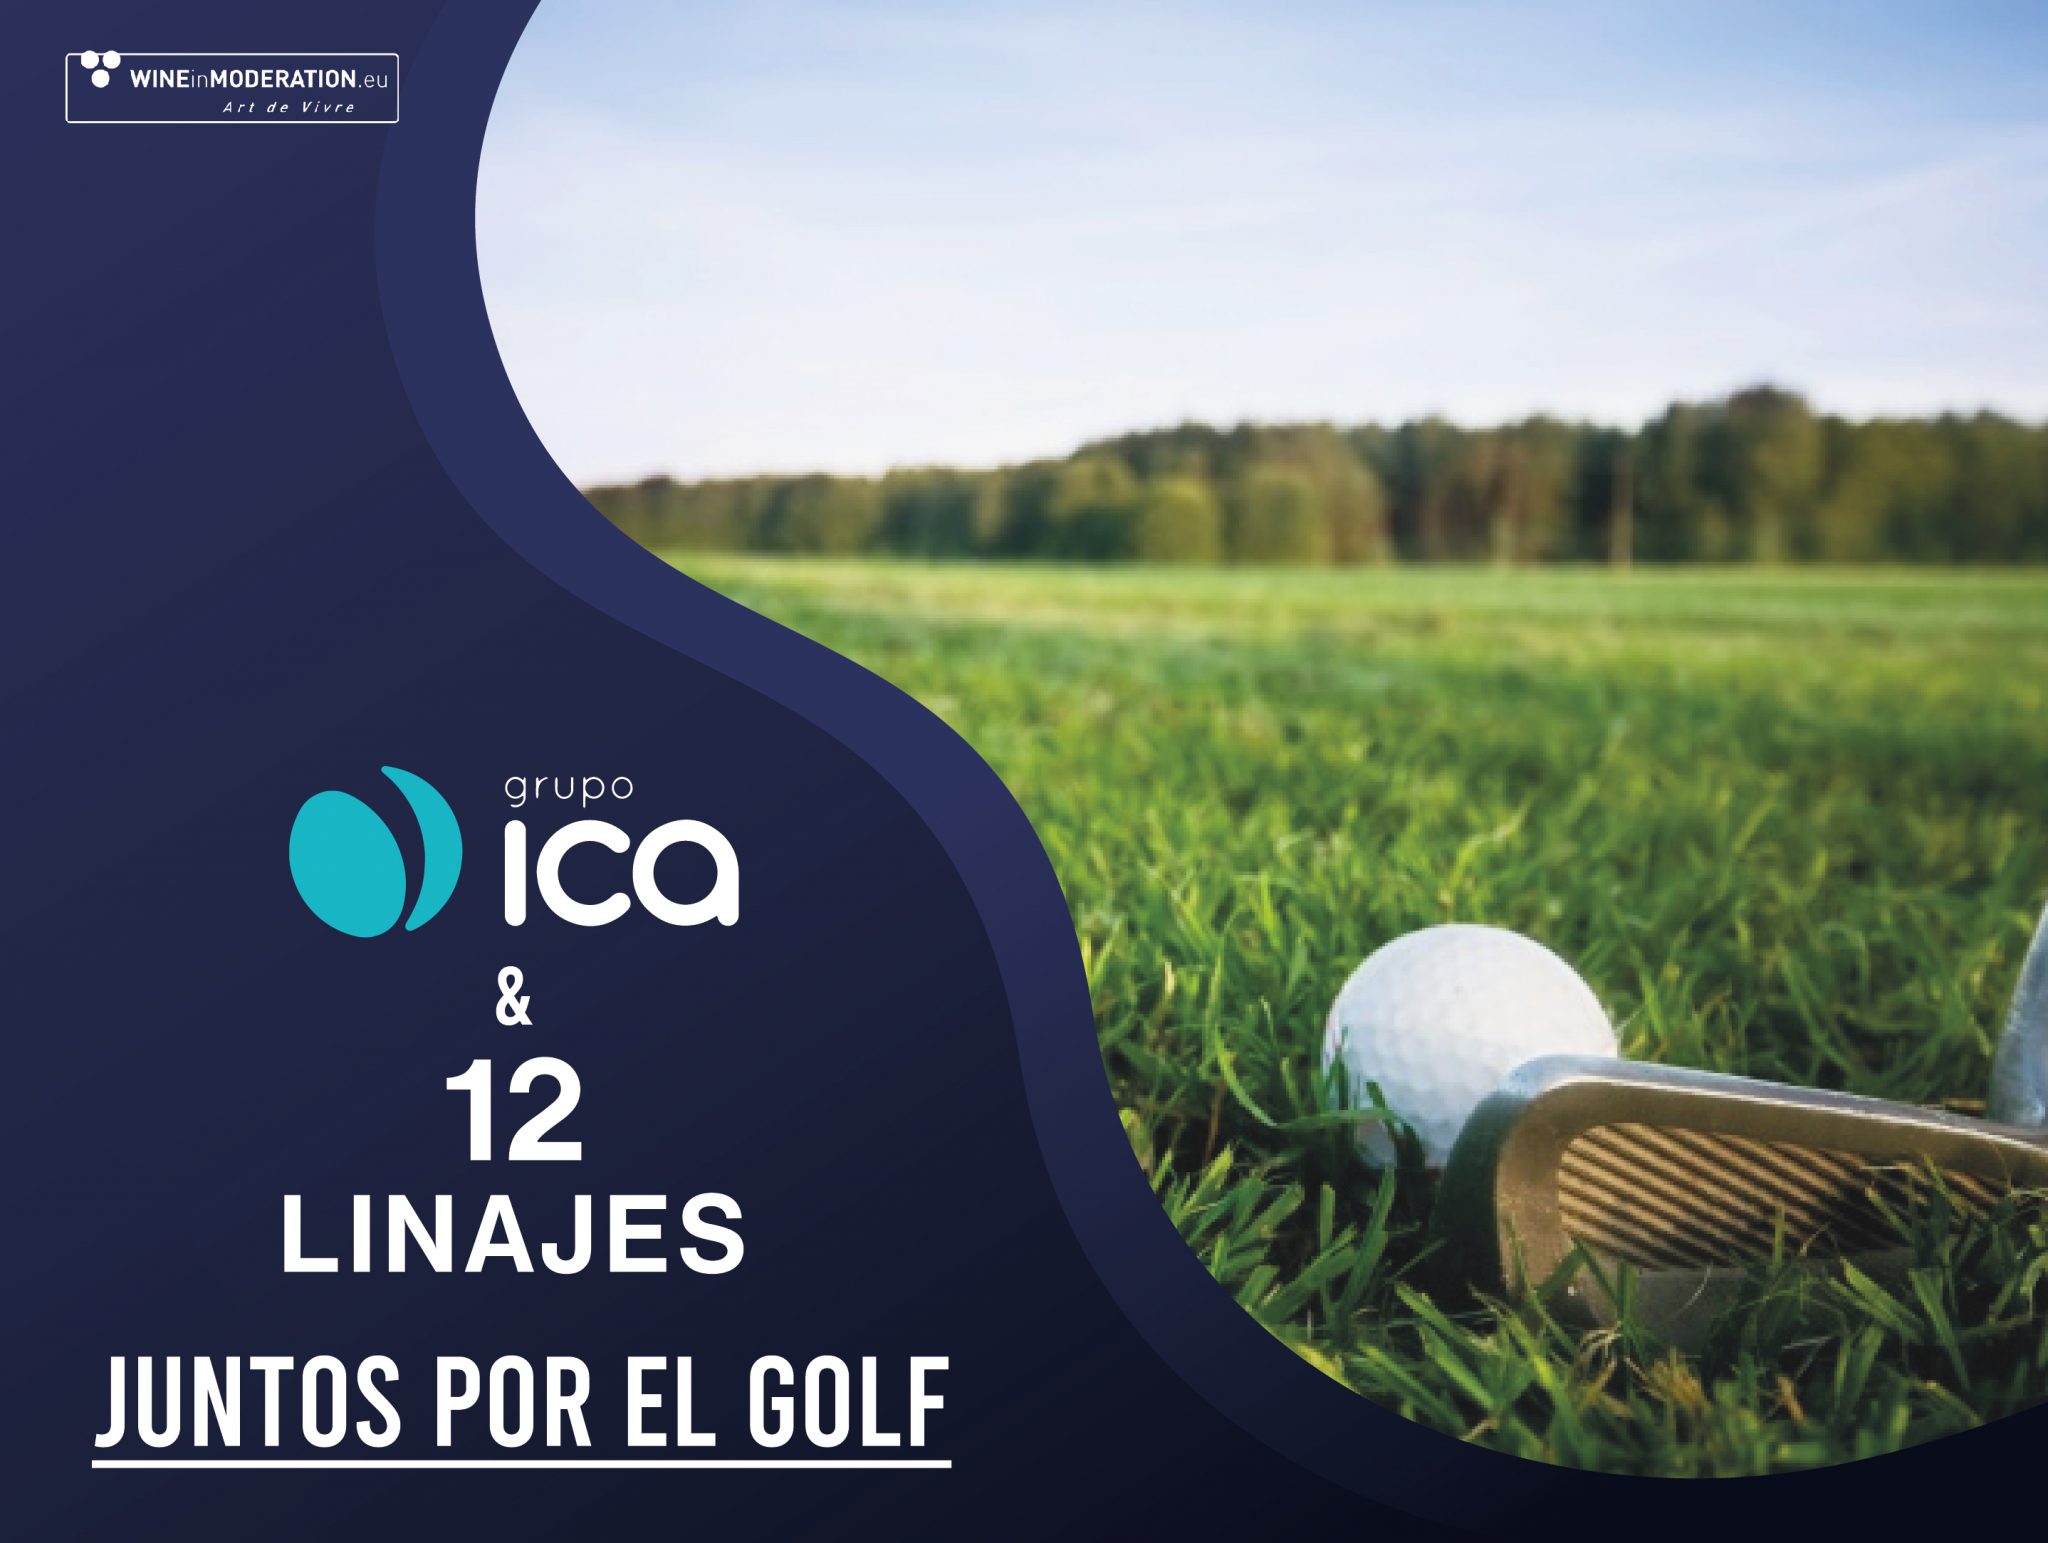 ICA Group counts on 12 Linajes